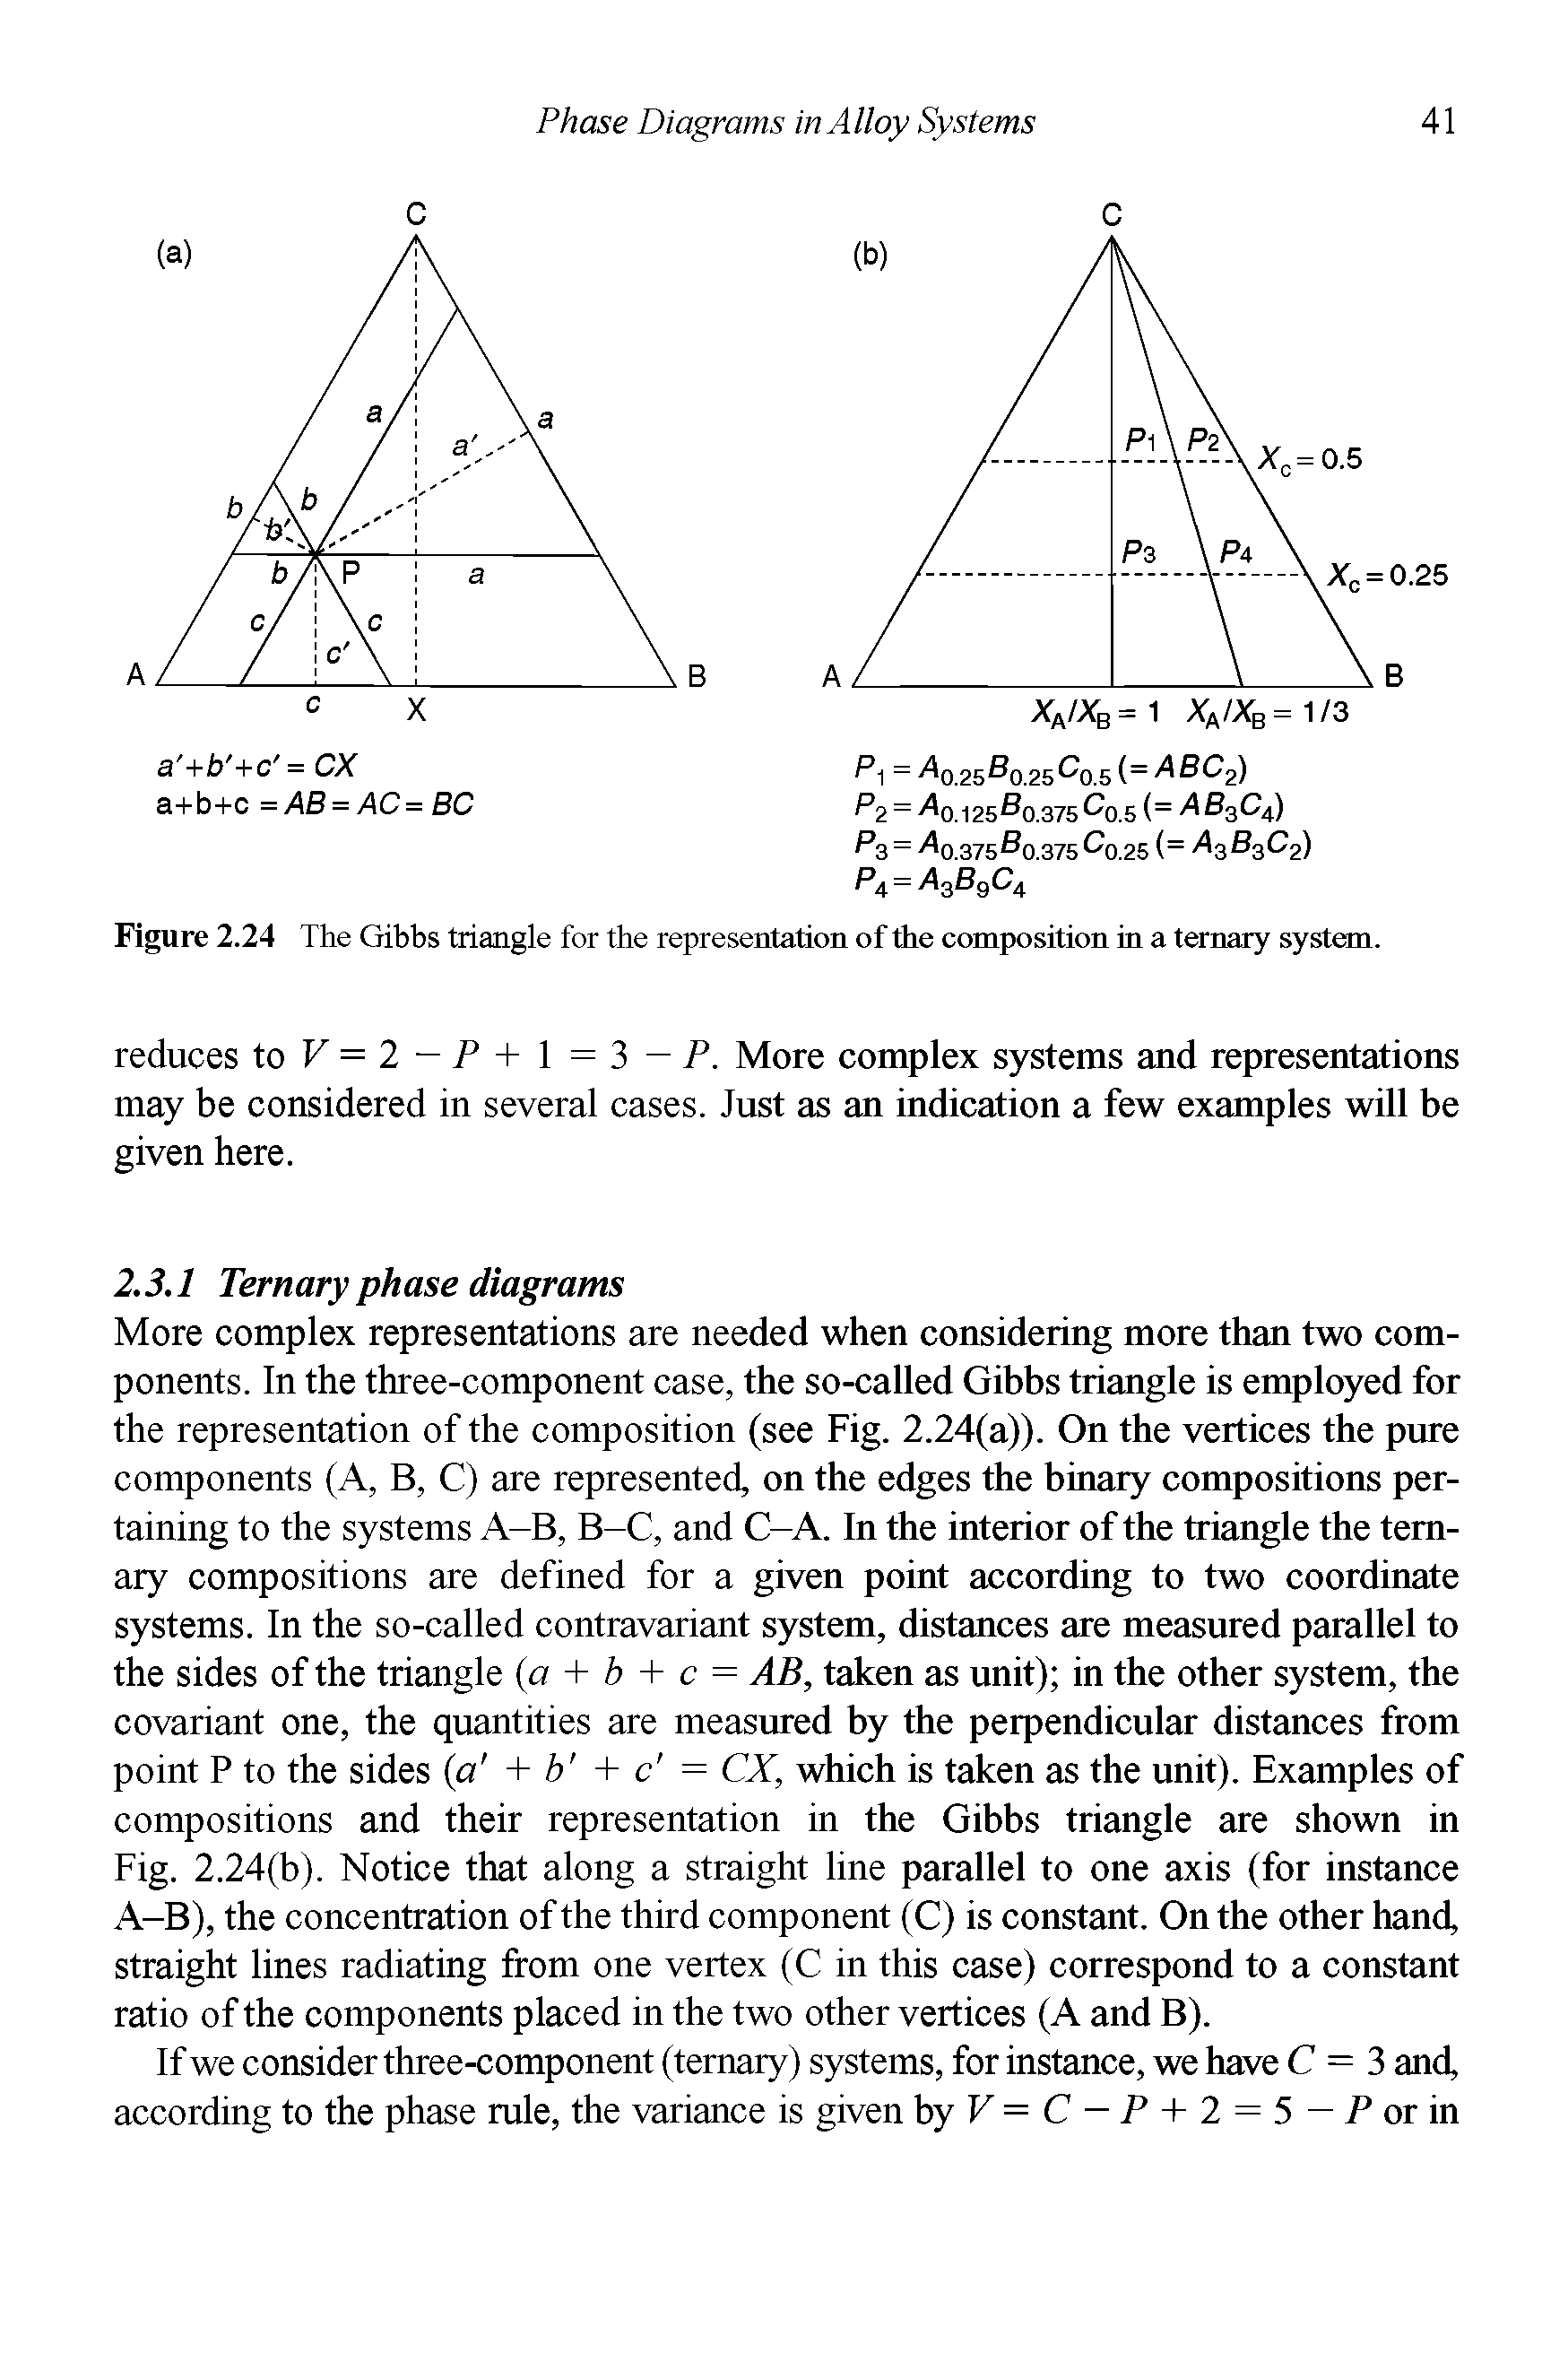 Figure 2.24 The Gibbs triangle for the representation of the composition in a ternary system.